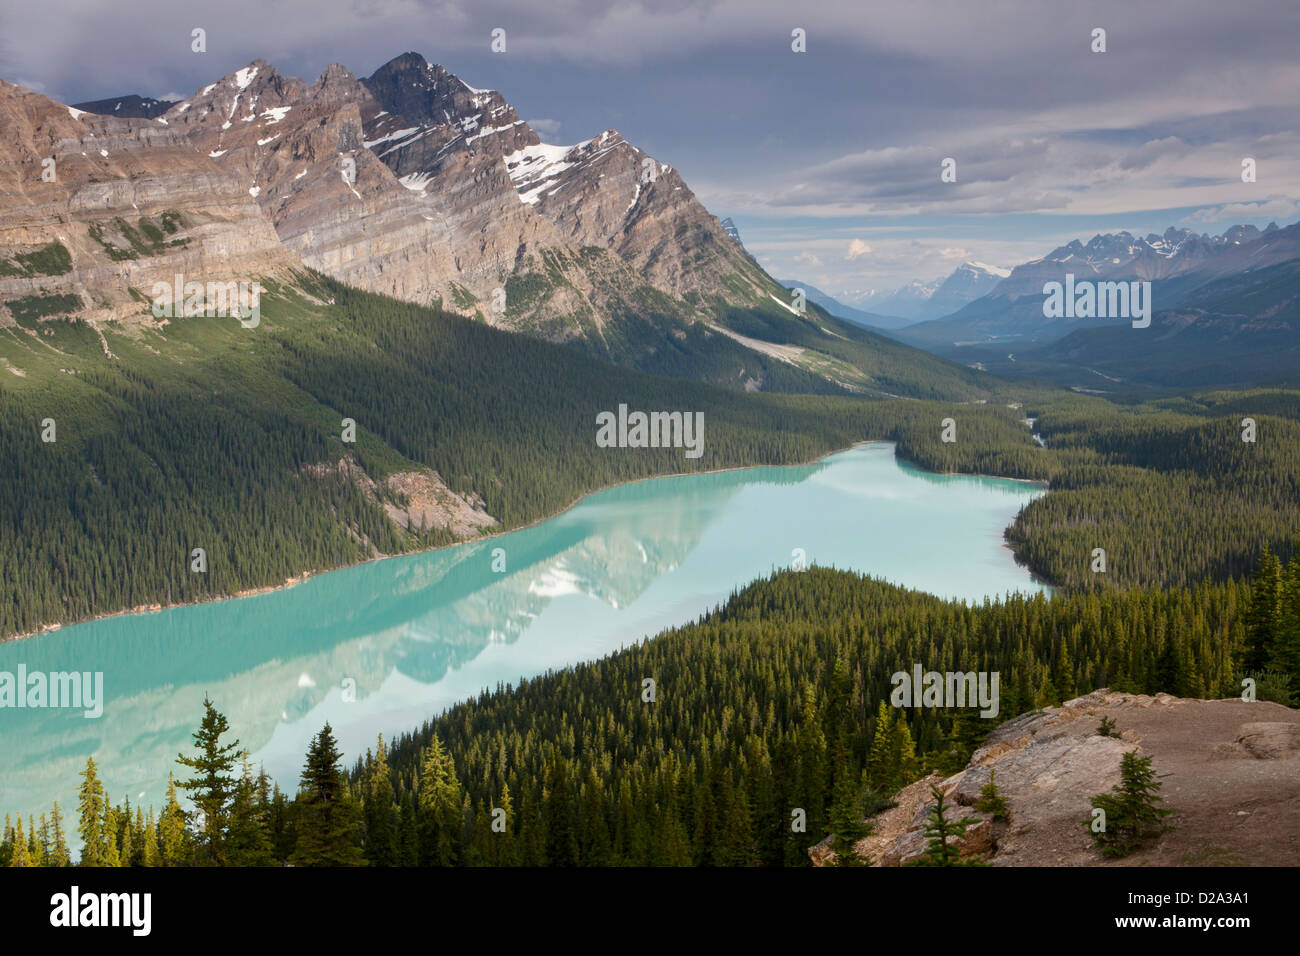 Dramatic clouds over Peyto Lake and Mt. Patterson in Banff National Park, Canadian Rockies, Alberta, Canada. Stock Photo